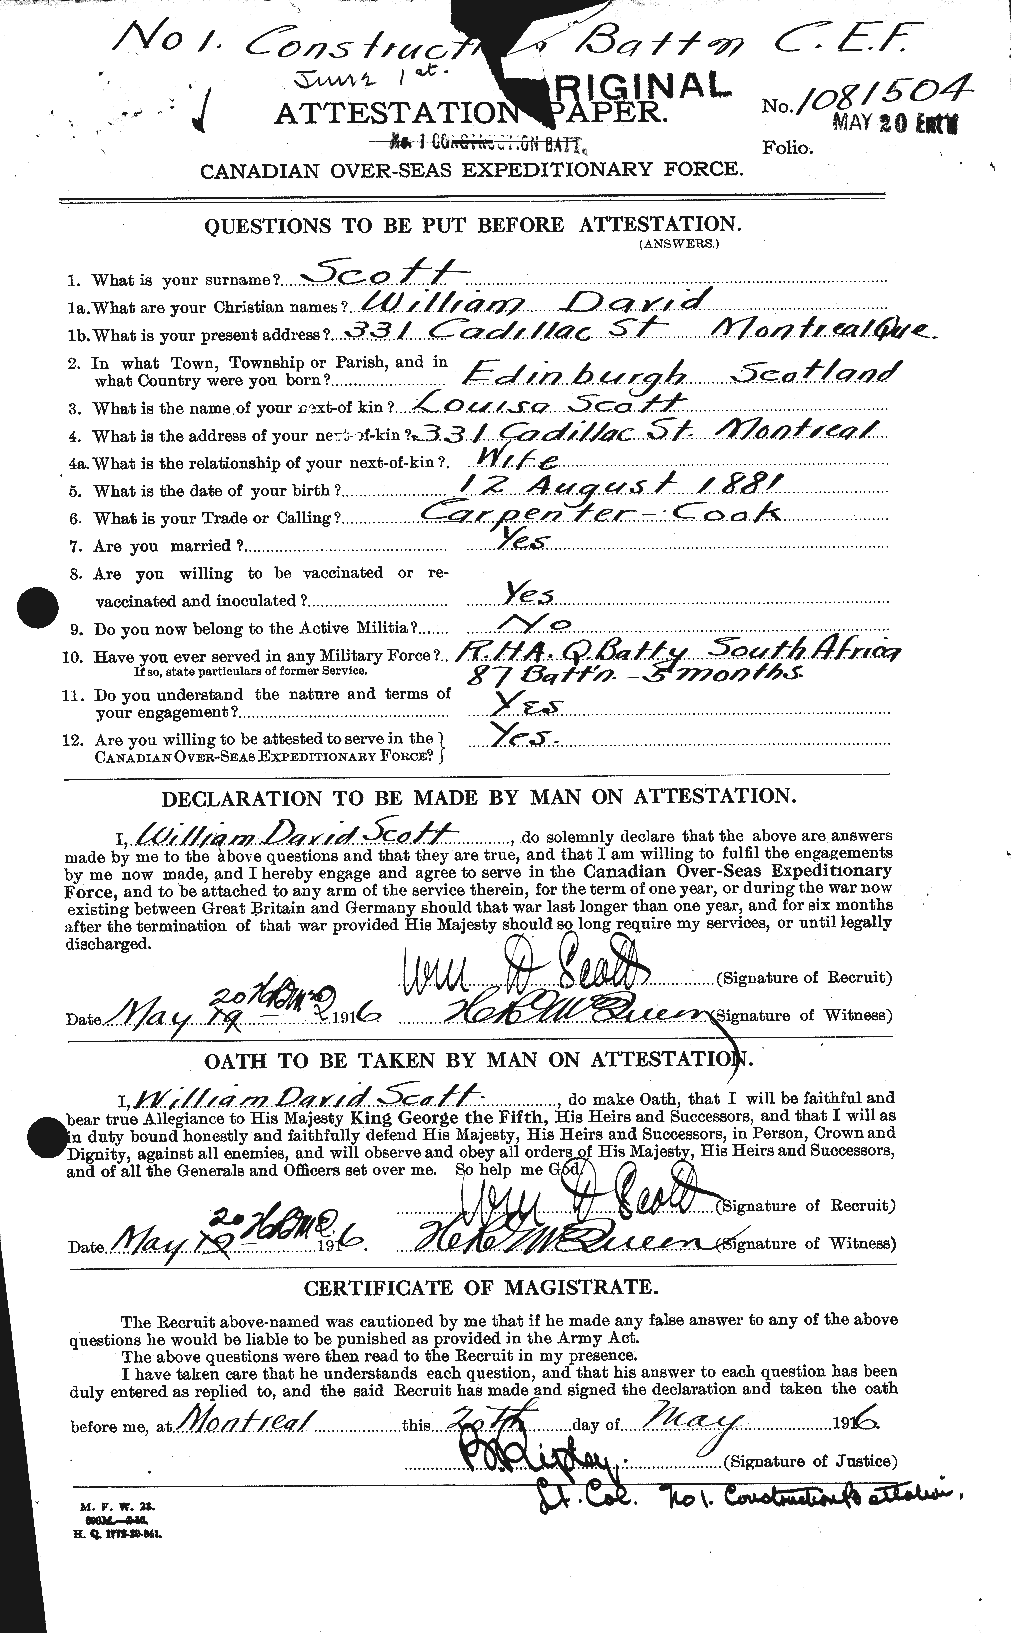 Personnel Records of the First World War - CEF 087033a